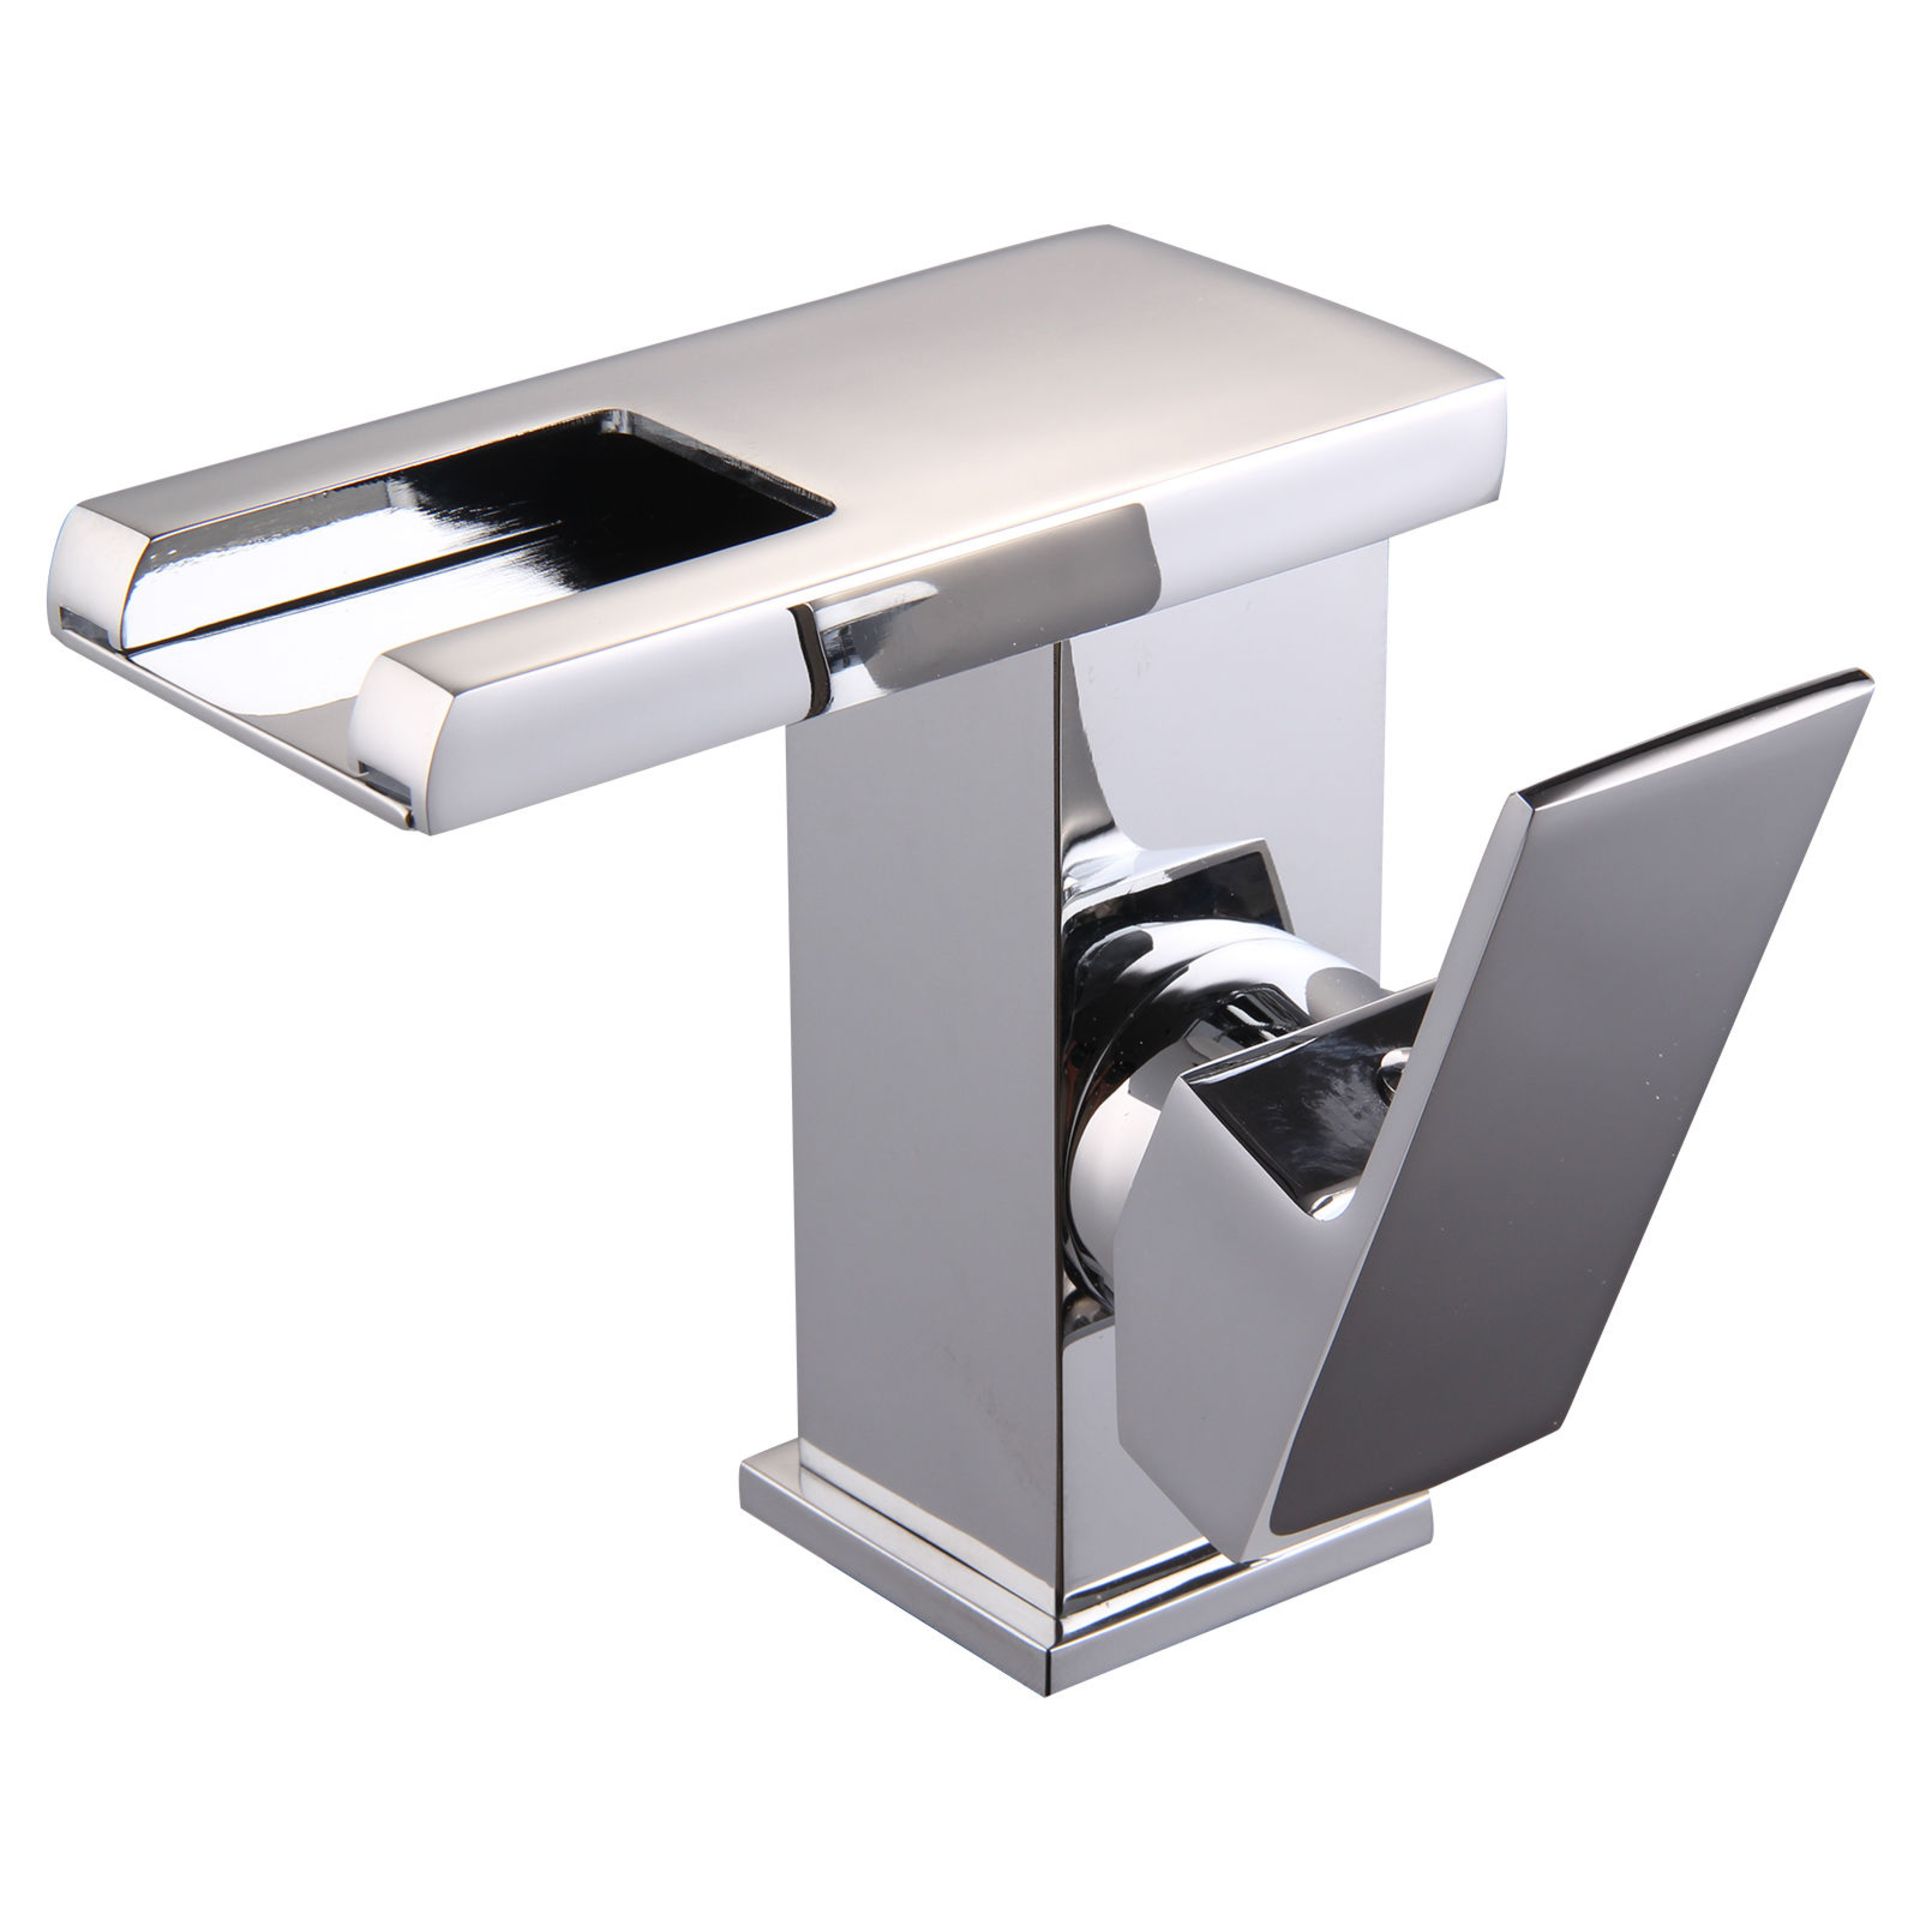 (I67) LED Waterfall Bathroom Basin Mixer Tap. RRP £229.99. Easy to install and clean. All copper - Image 3 of 3